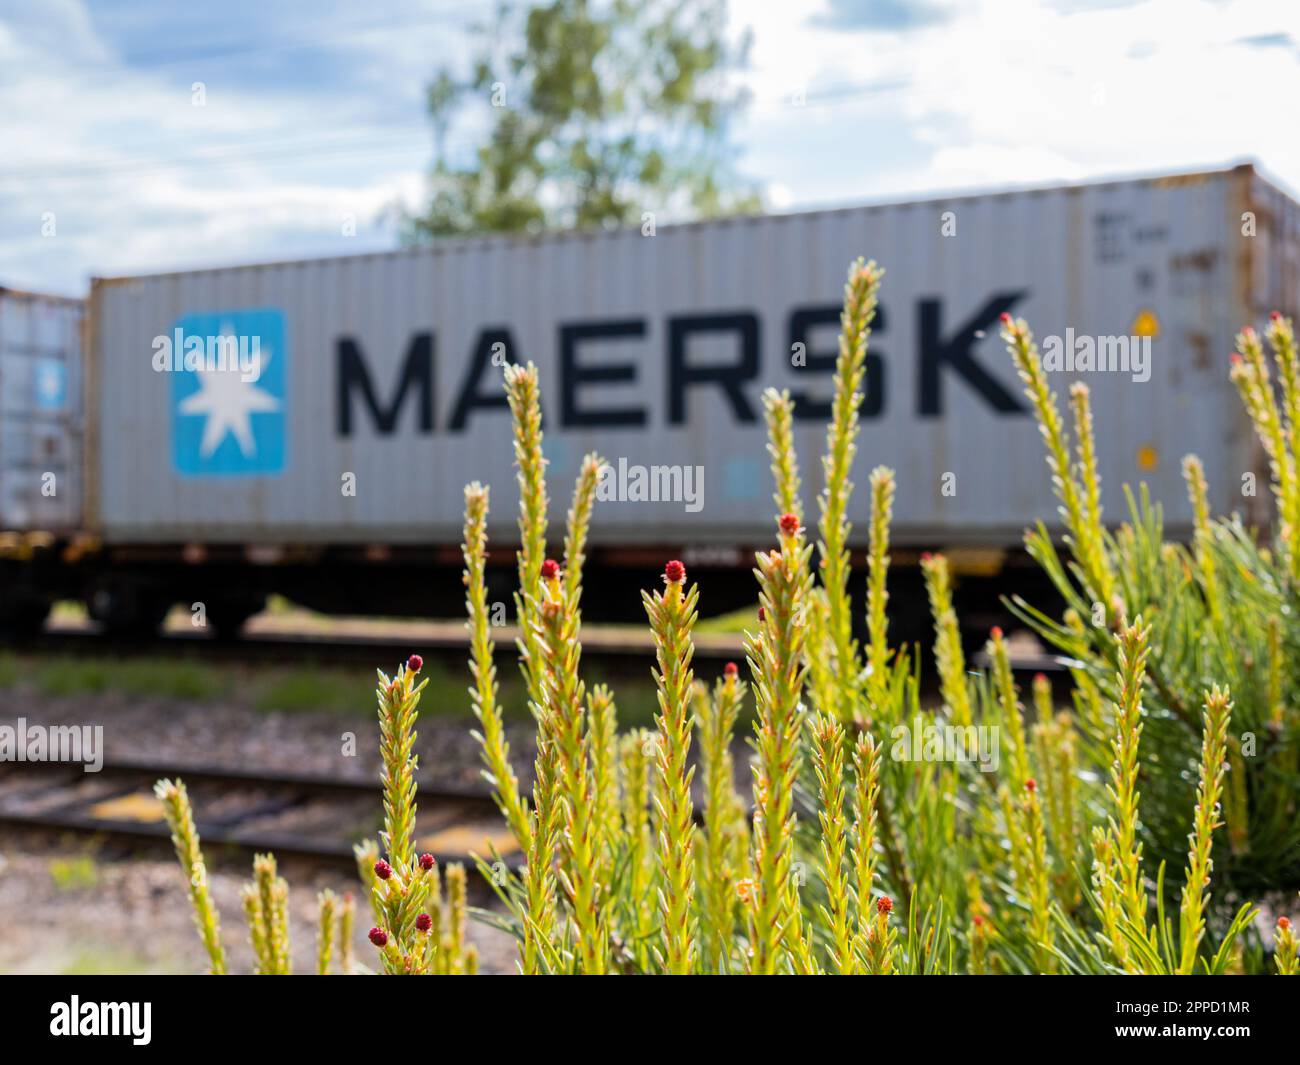 Angelsberg, Sweden - May 28, 2022: A bush filled with colorful flowers stands near a train loaded for transportation, framed by an expansive cloudy sk Stock Photo